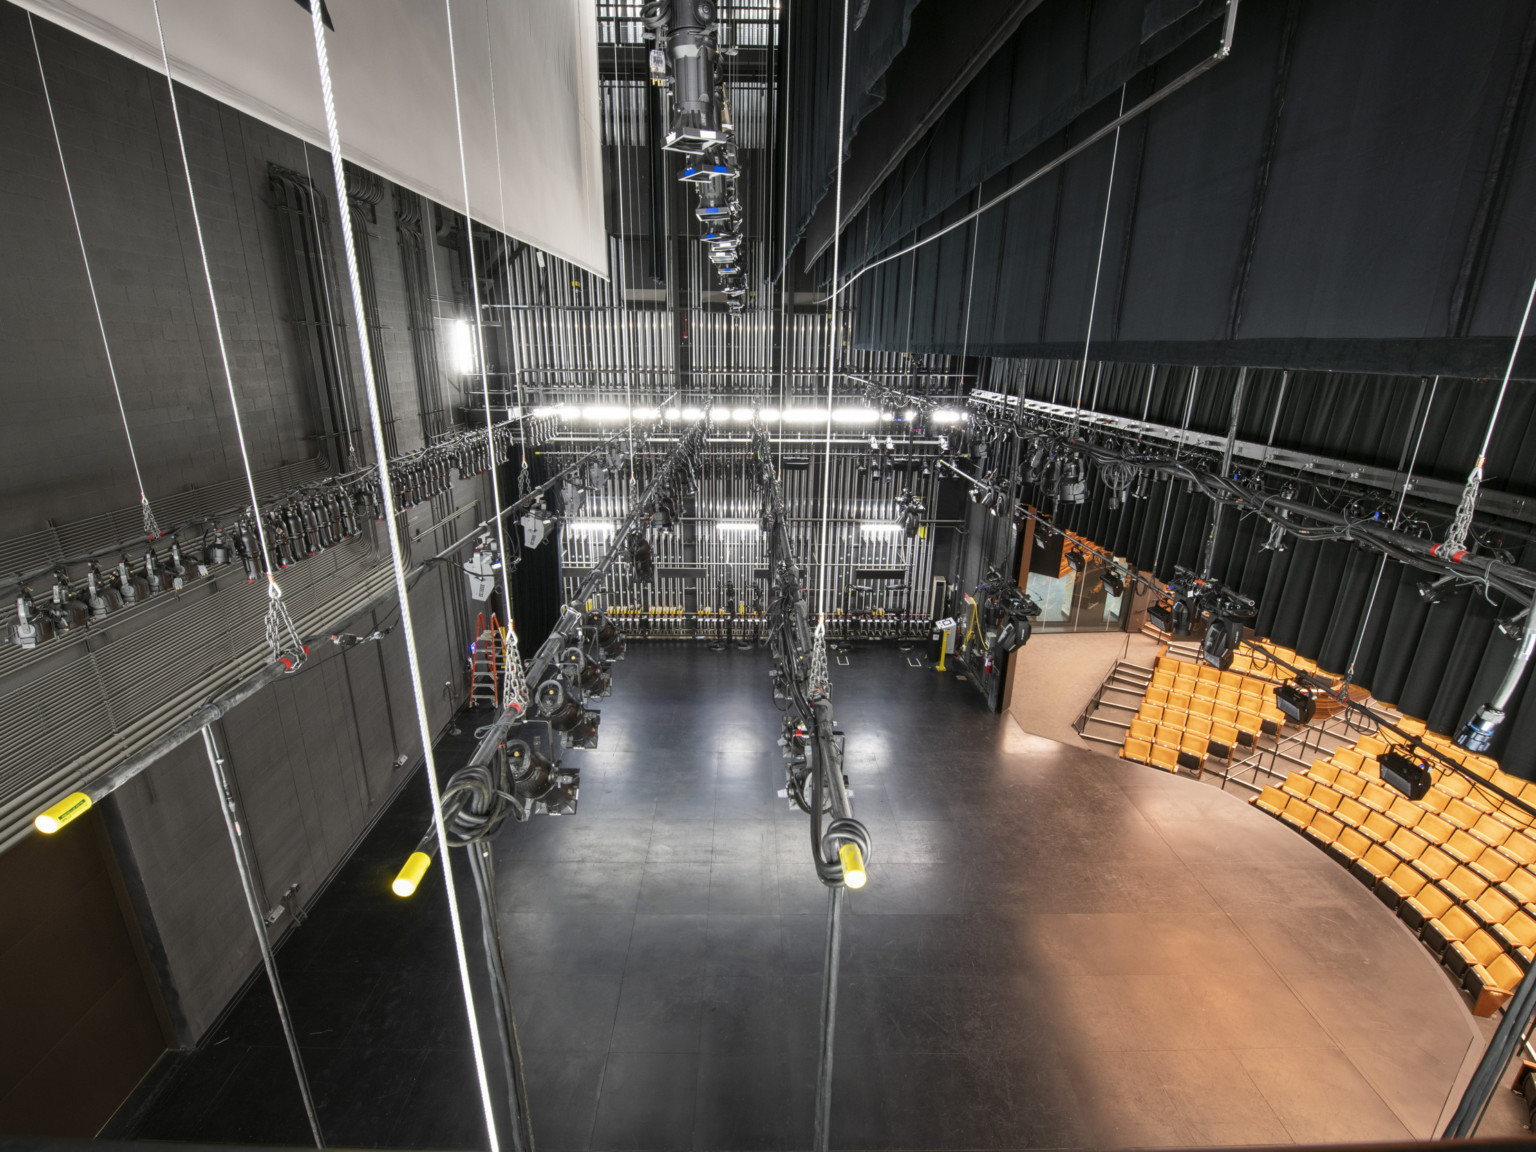 Stage viewed from above showing the lighting, curtains, and ropes at the side of the stage to control these systems